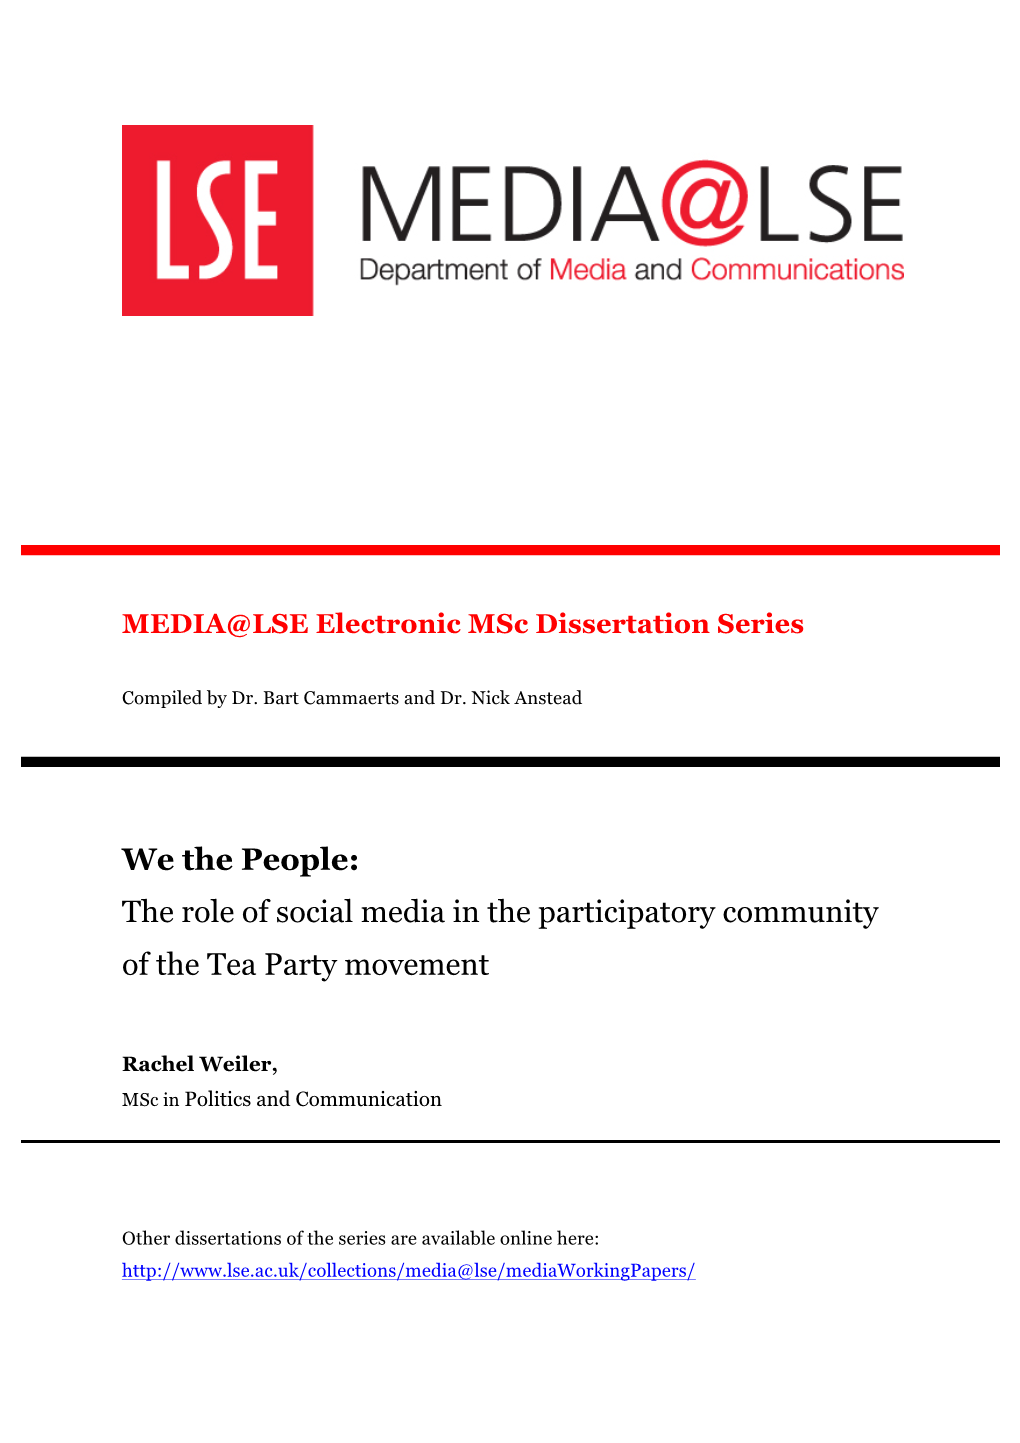 We the People: the Role of Social Media in the Participatory Community of the Tea Party Movement